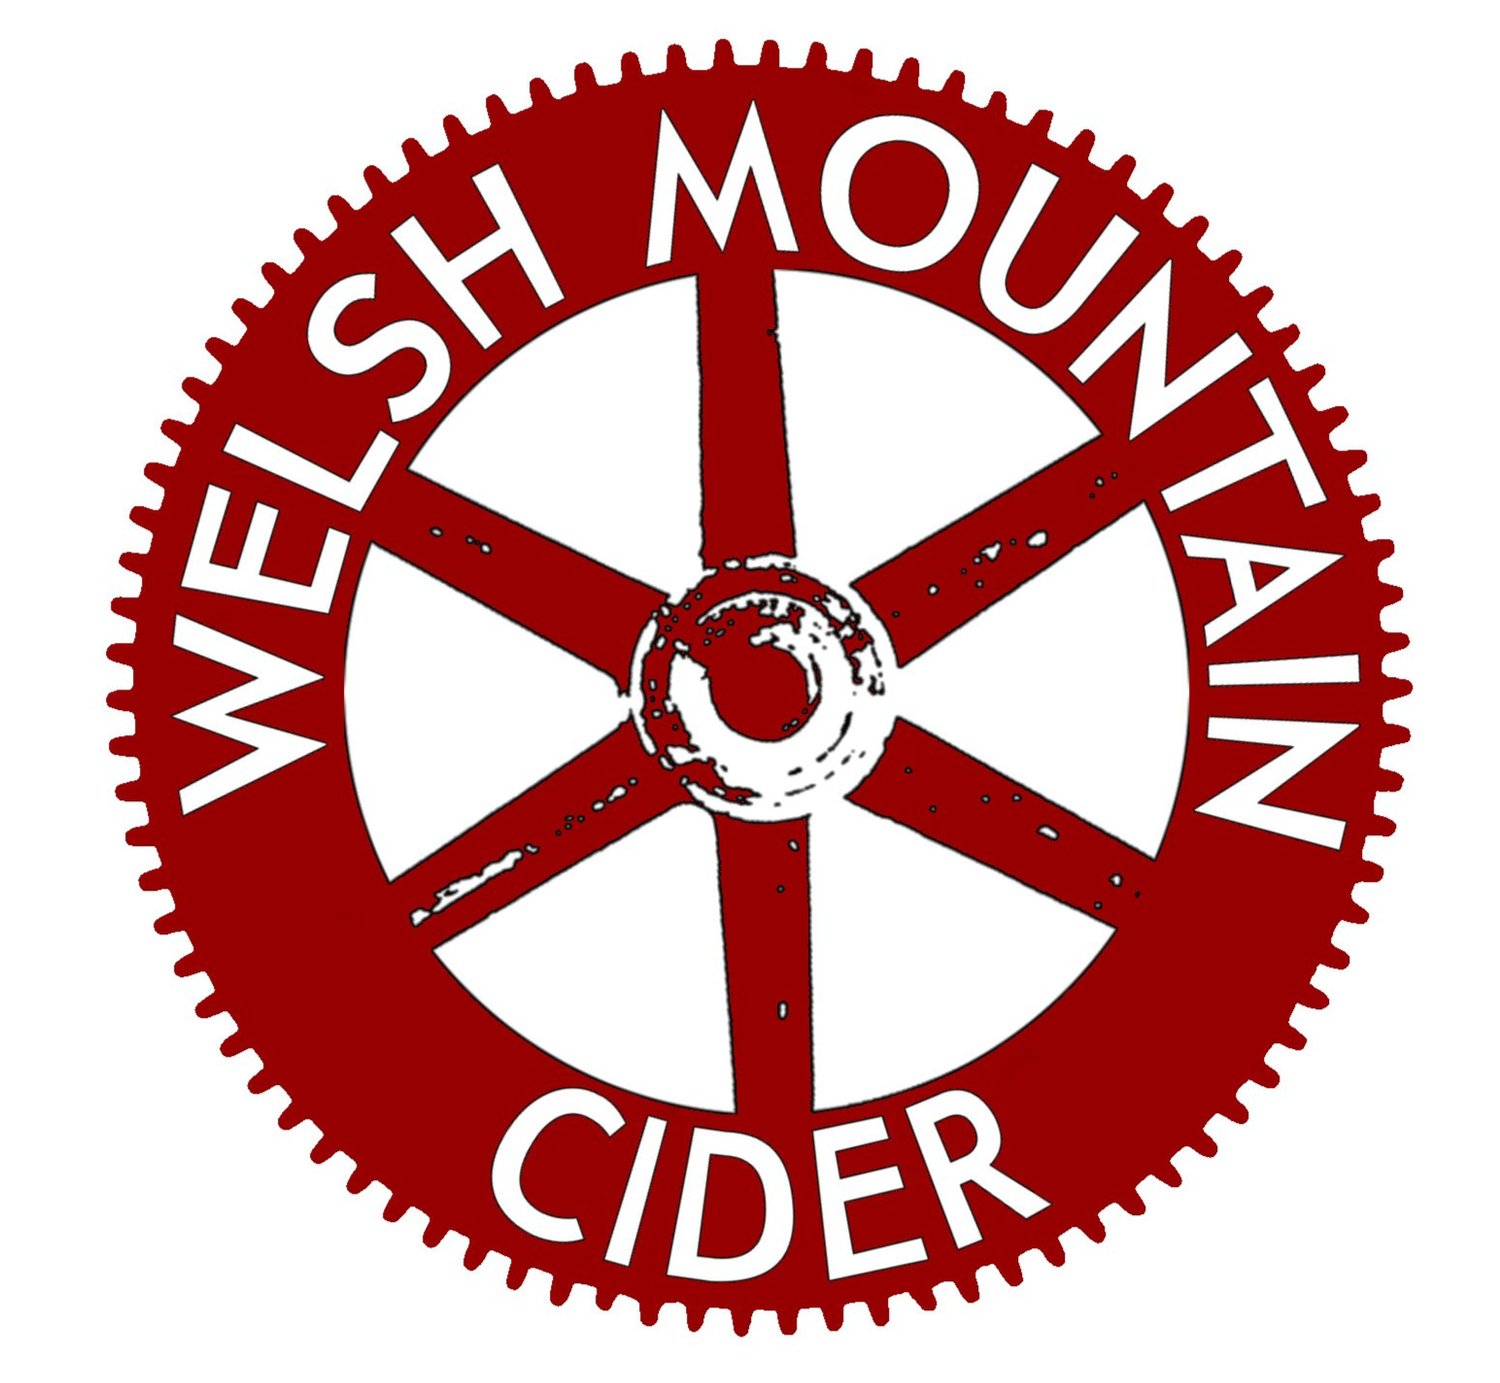 Welsh Mountain Cider